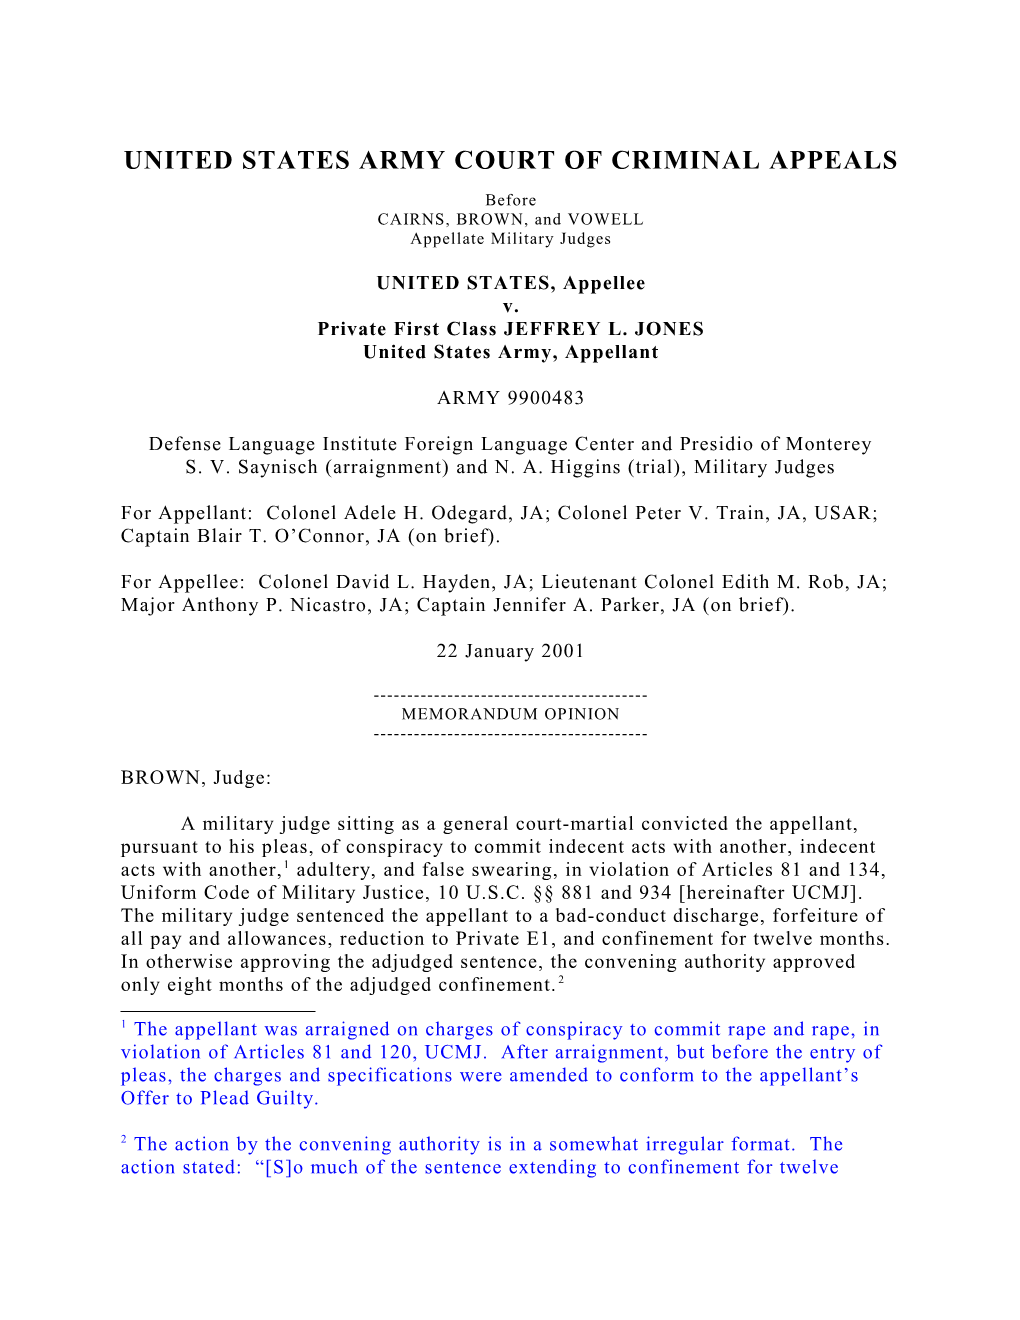 United States Army Court of Criminal Appeals s4